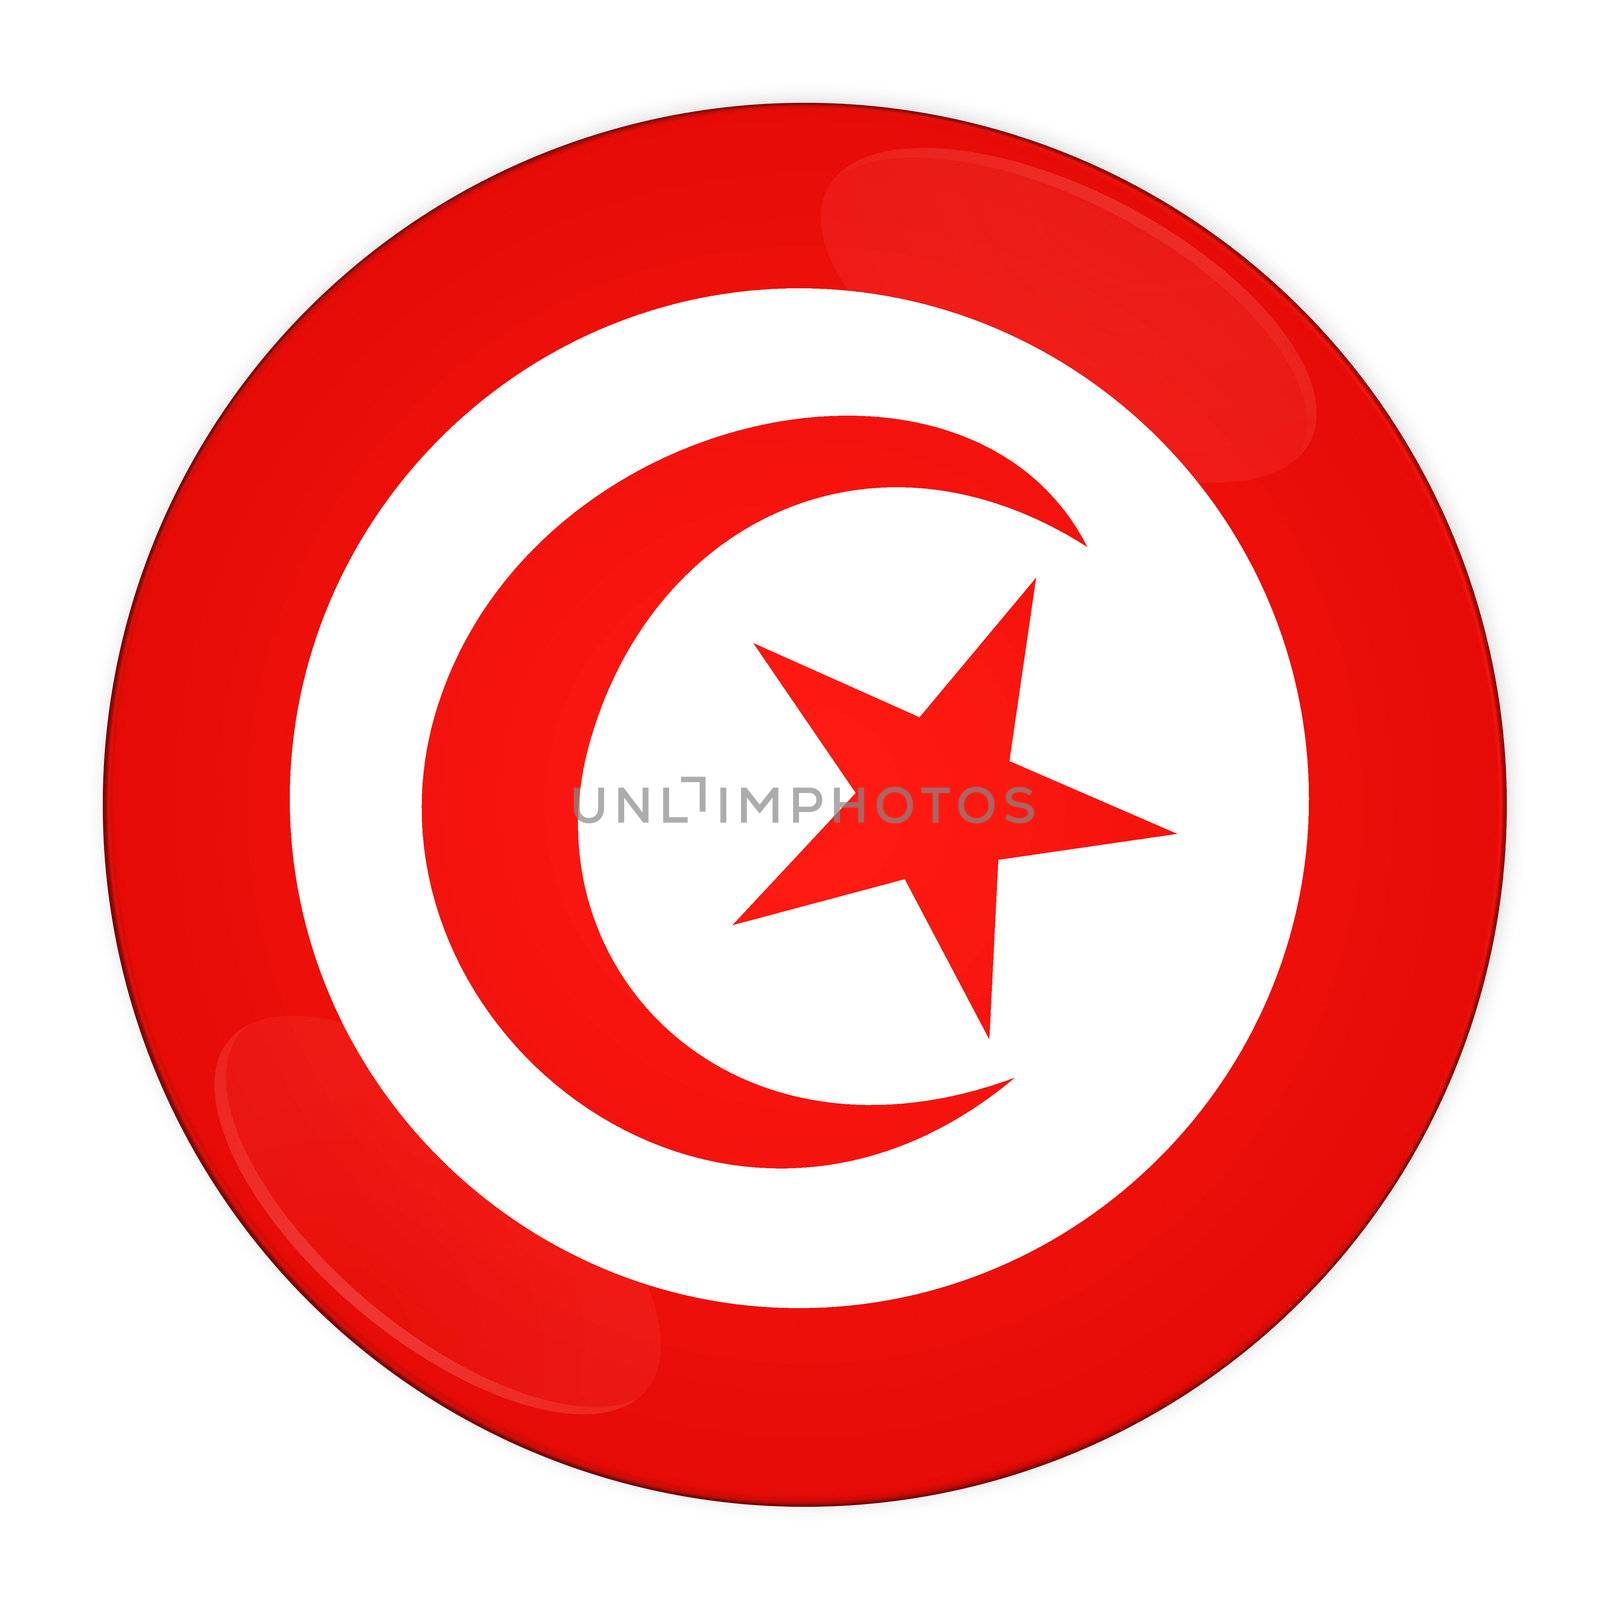 Abstract illustration: button with flag from Tunisia country